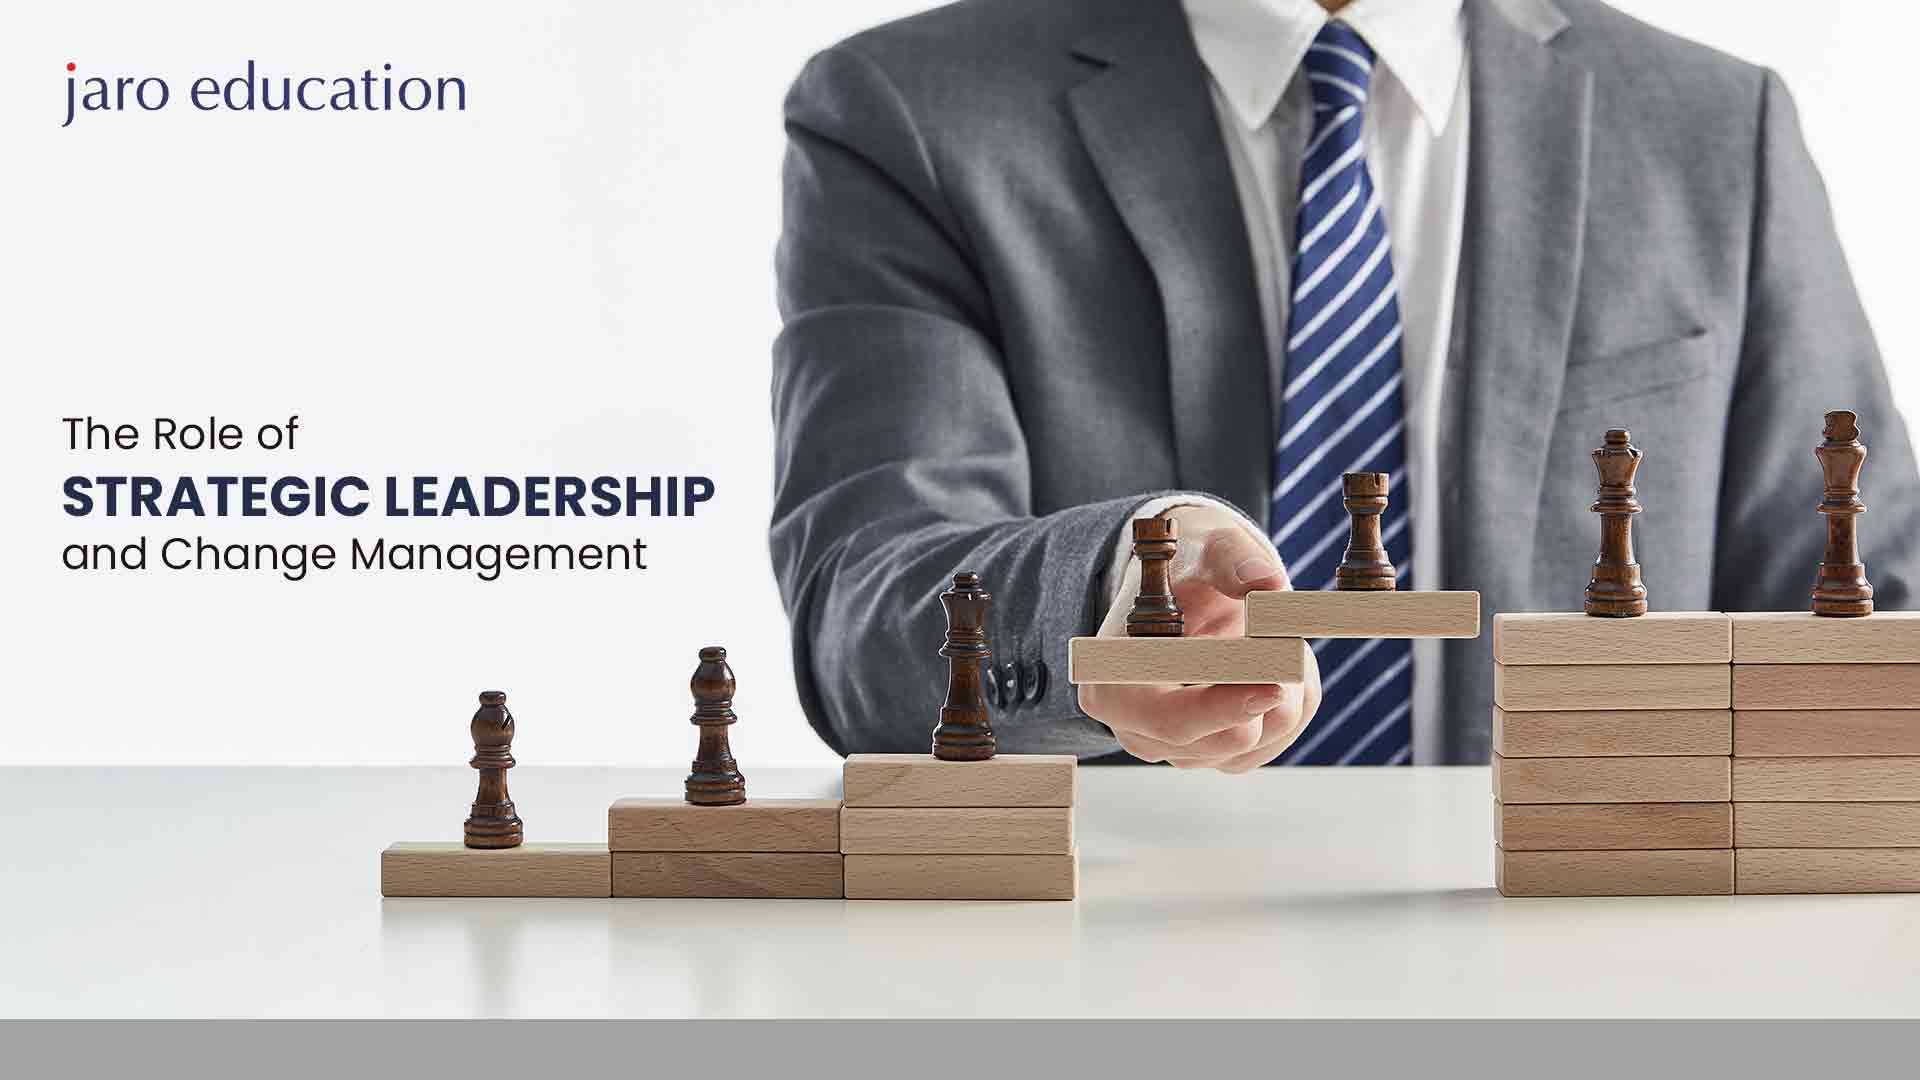 The Role of Strategic Leadership and Change Management